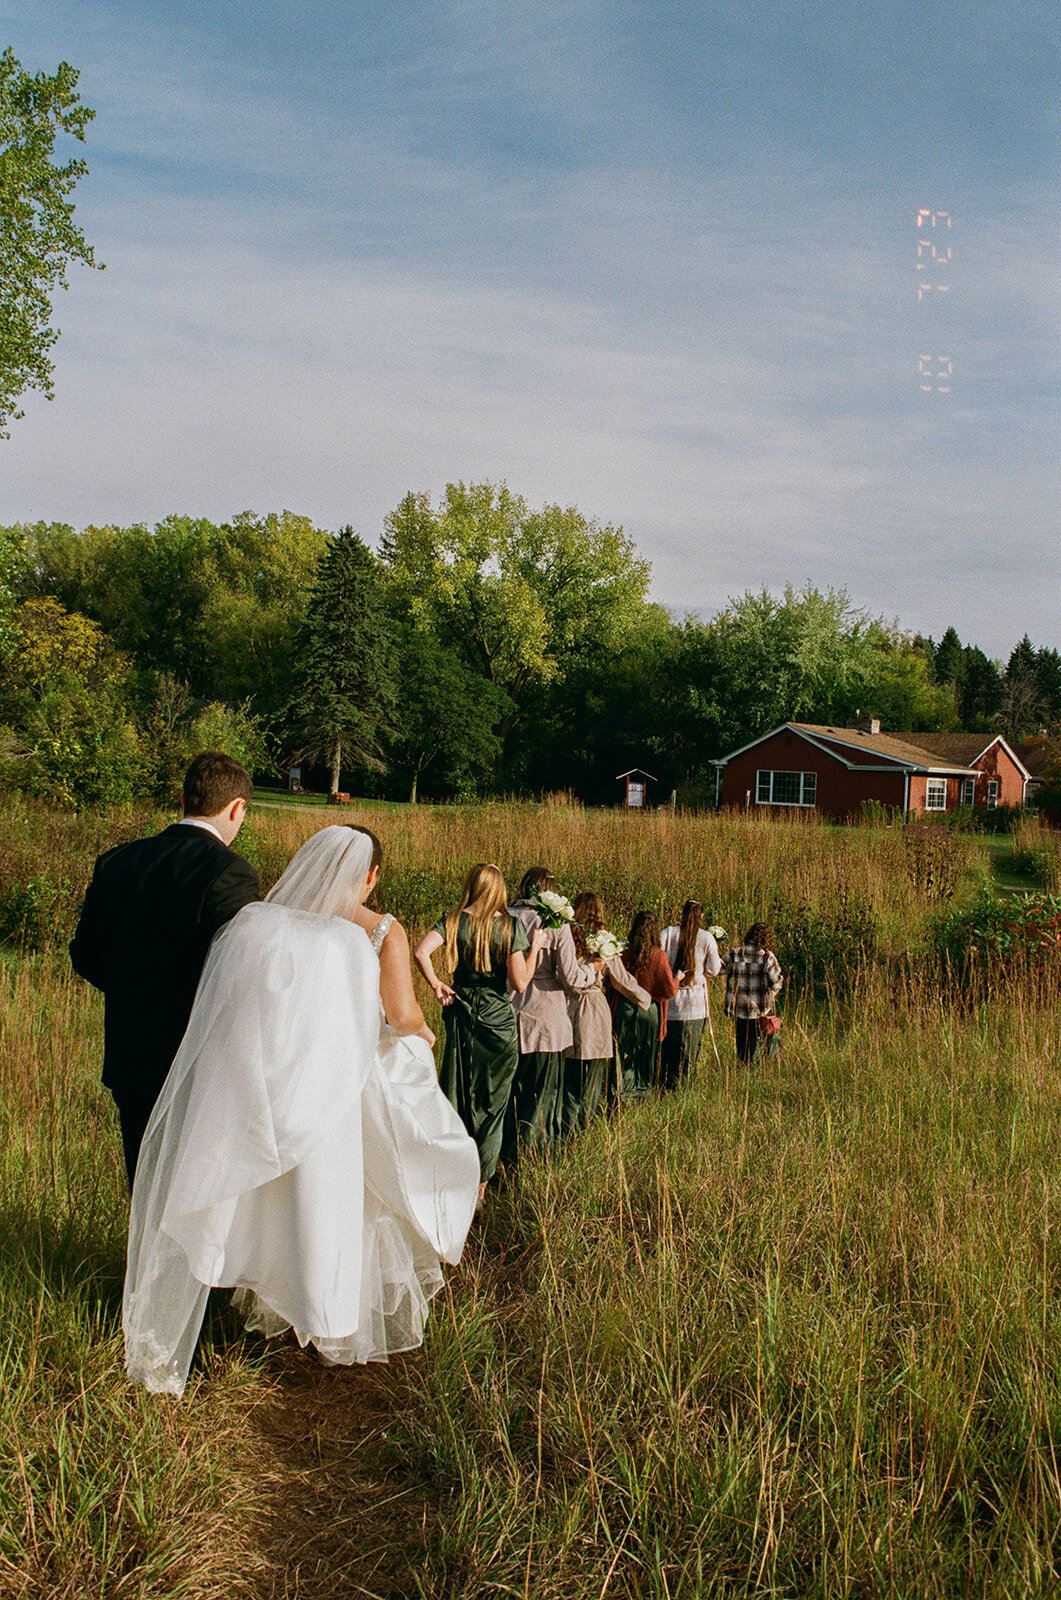 Bridal party casually walking away from camera on film.